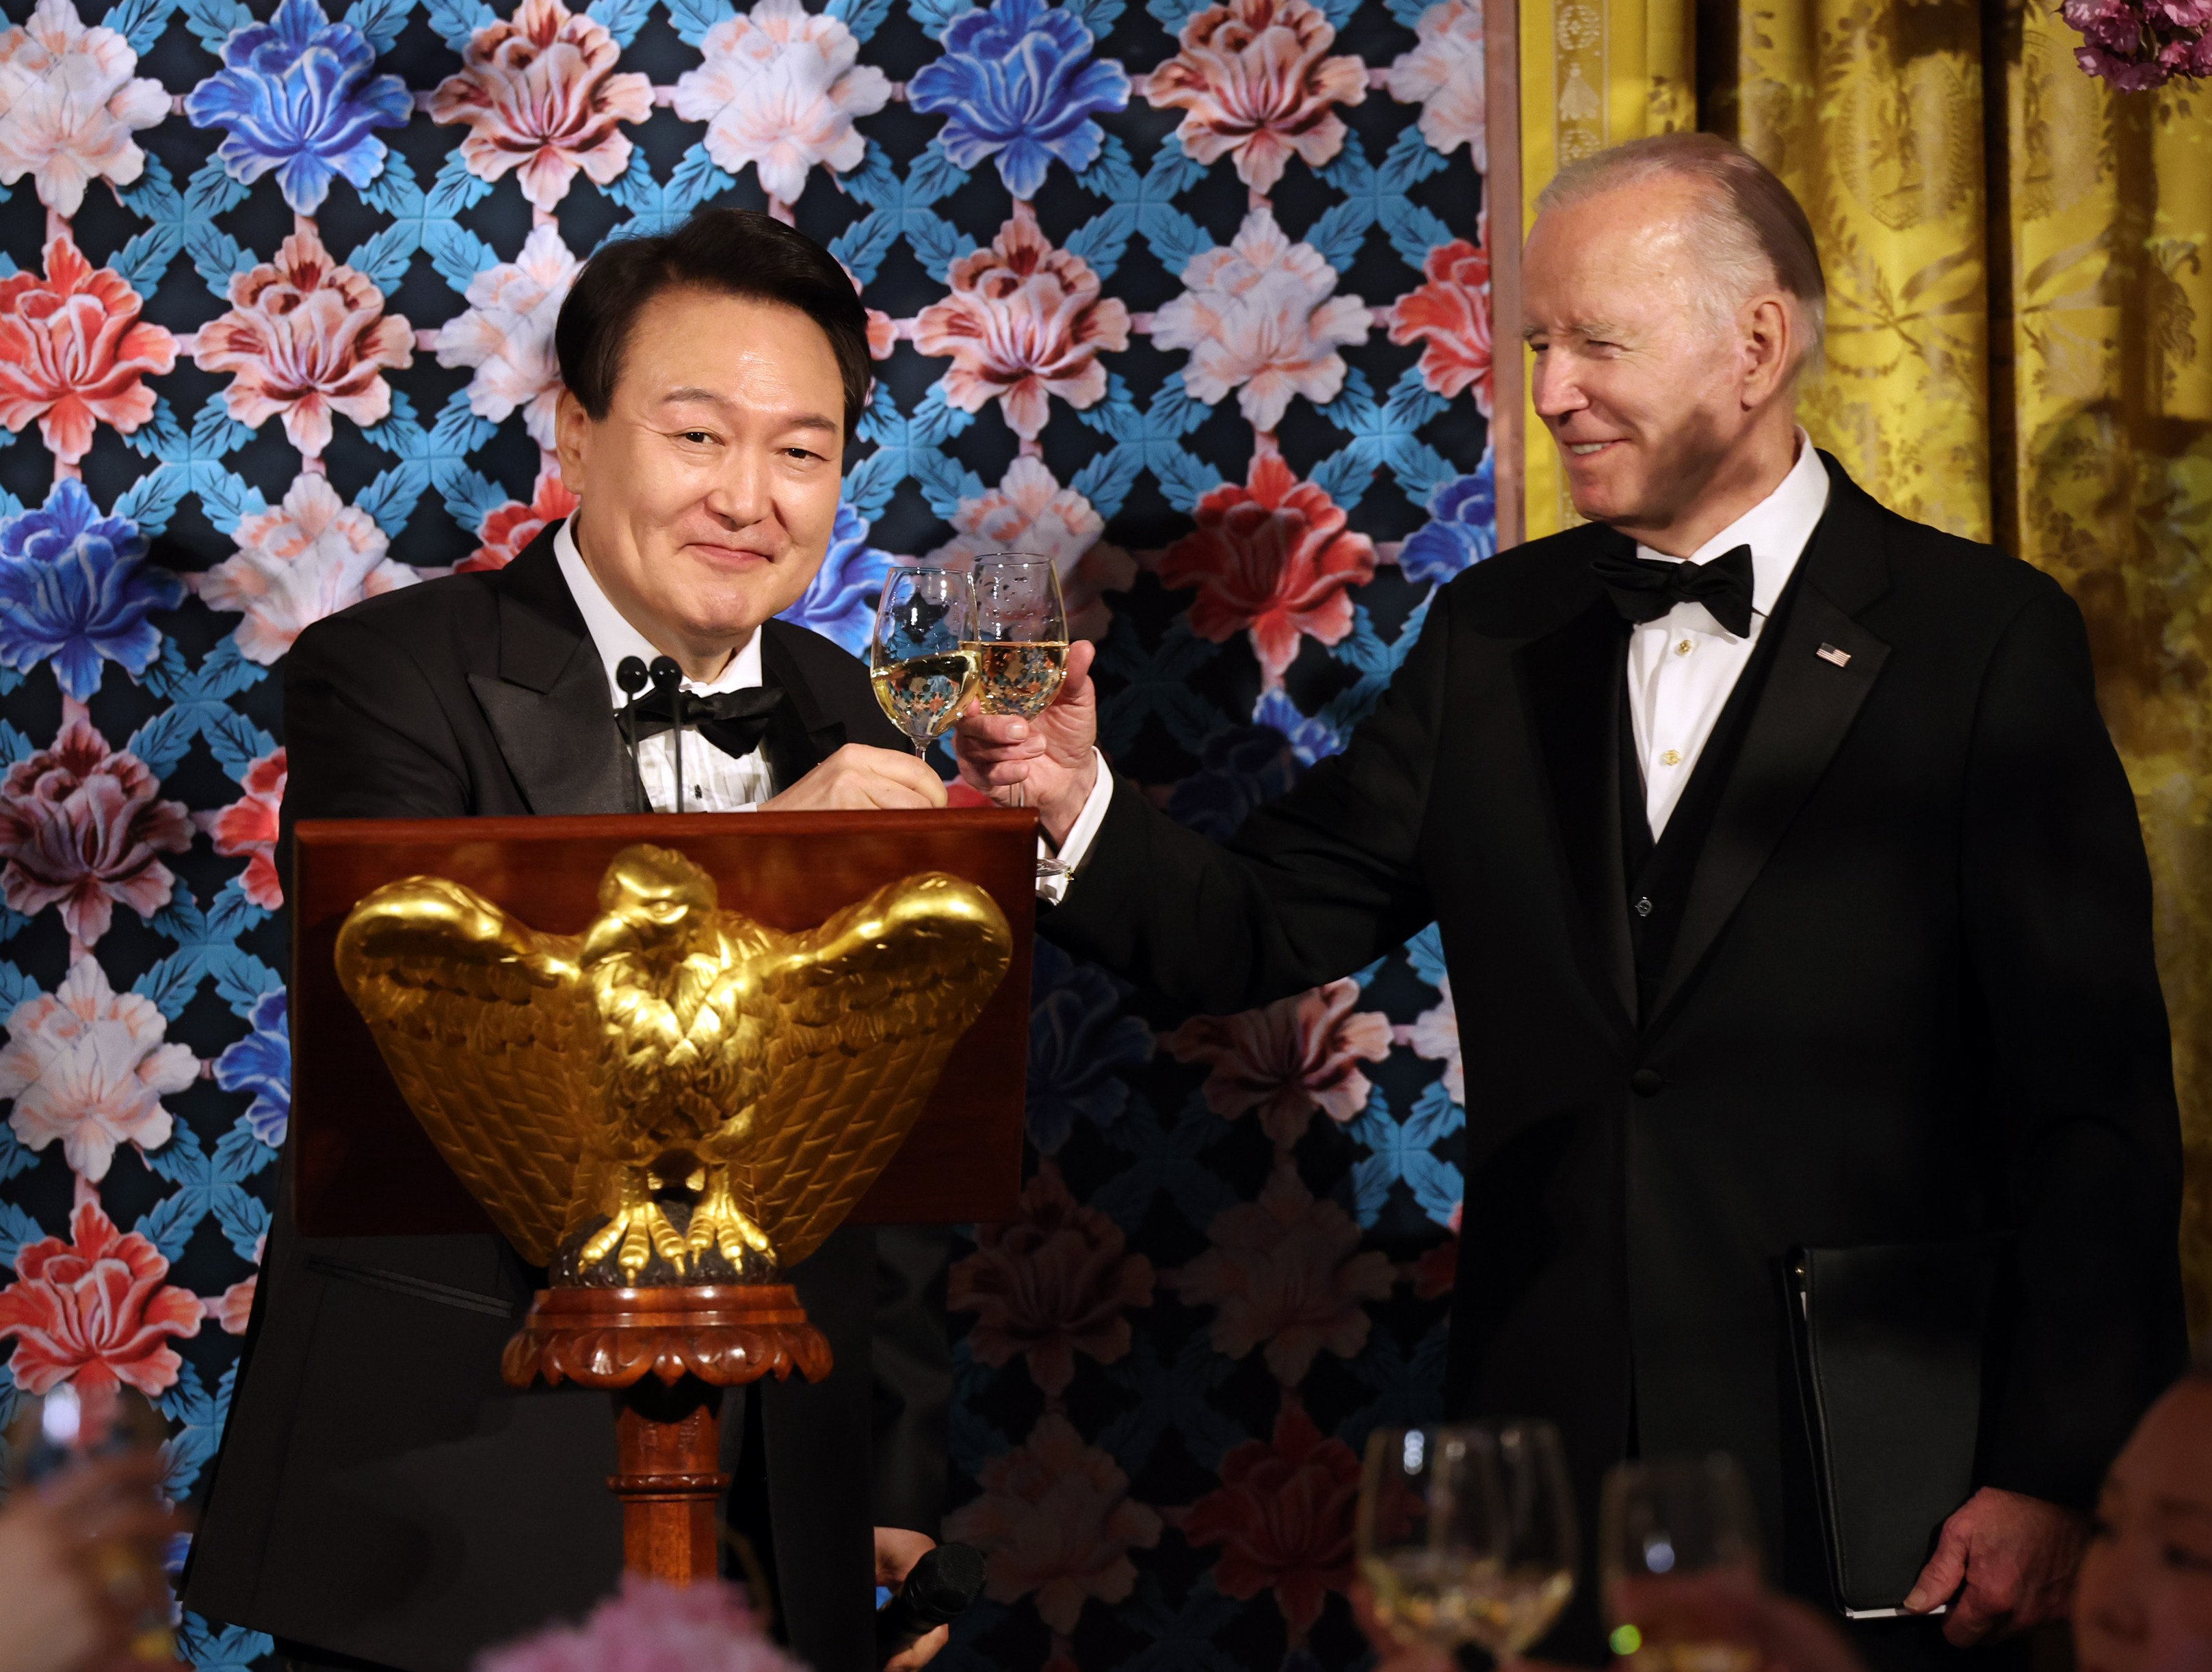 US President Joe Biden and his South Korean counterpart Yoon Suk-yeol (left) toast during a state dinner at the White House on April 26. Photo: YNA/dpa